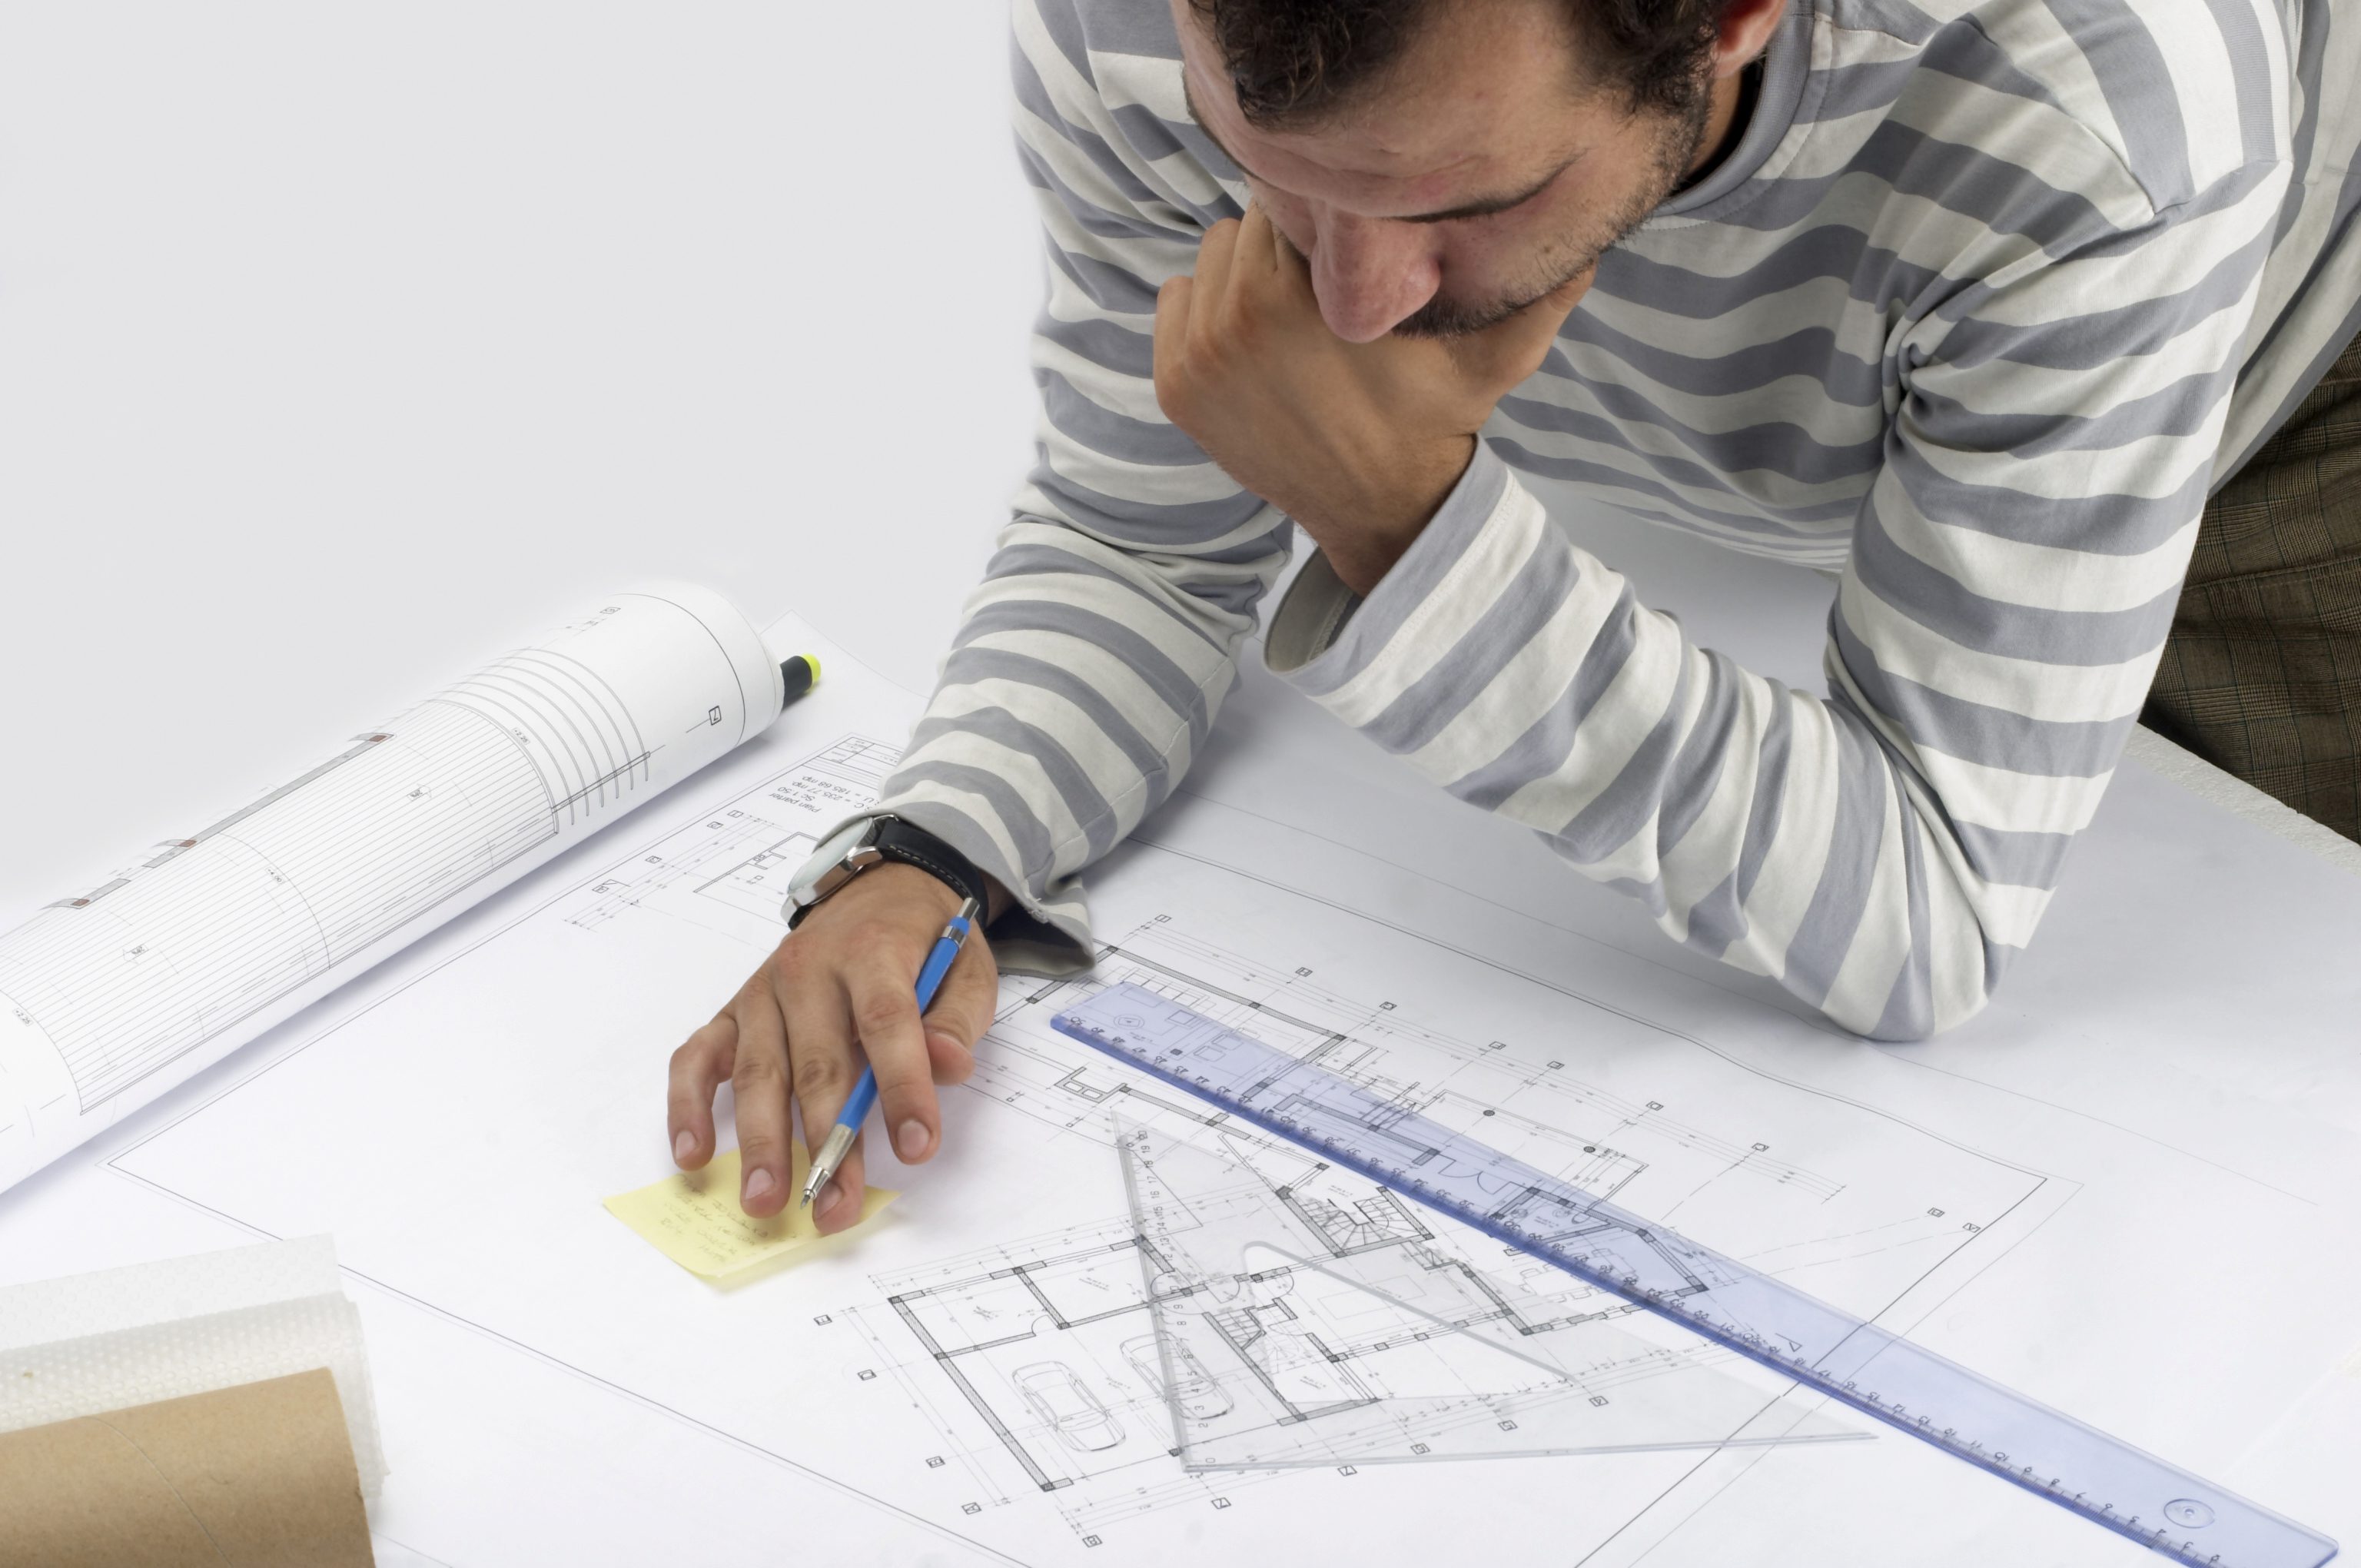 A man poring over architectural floor plans